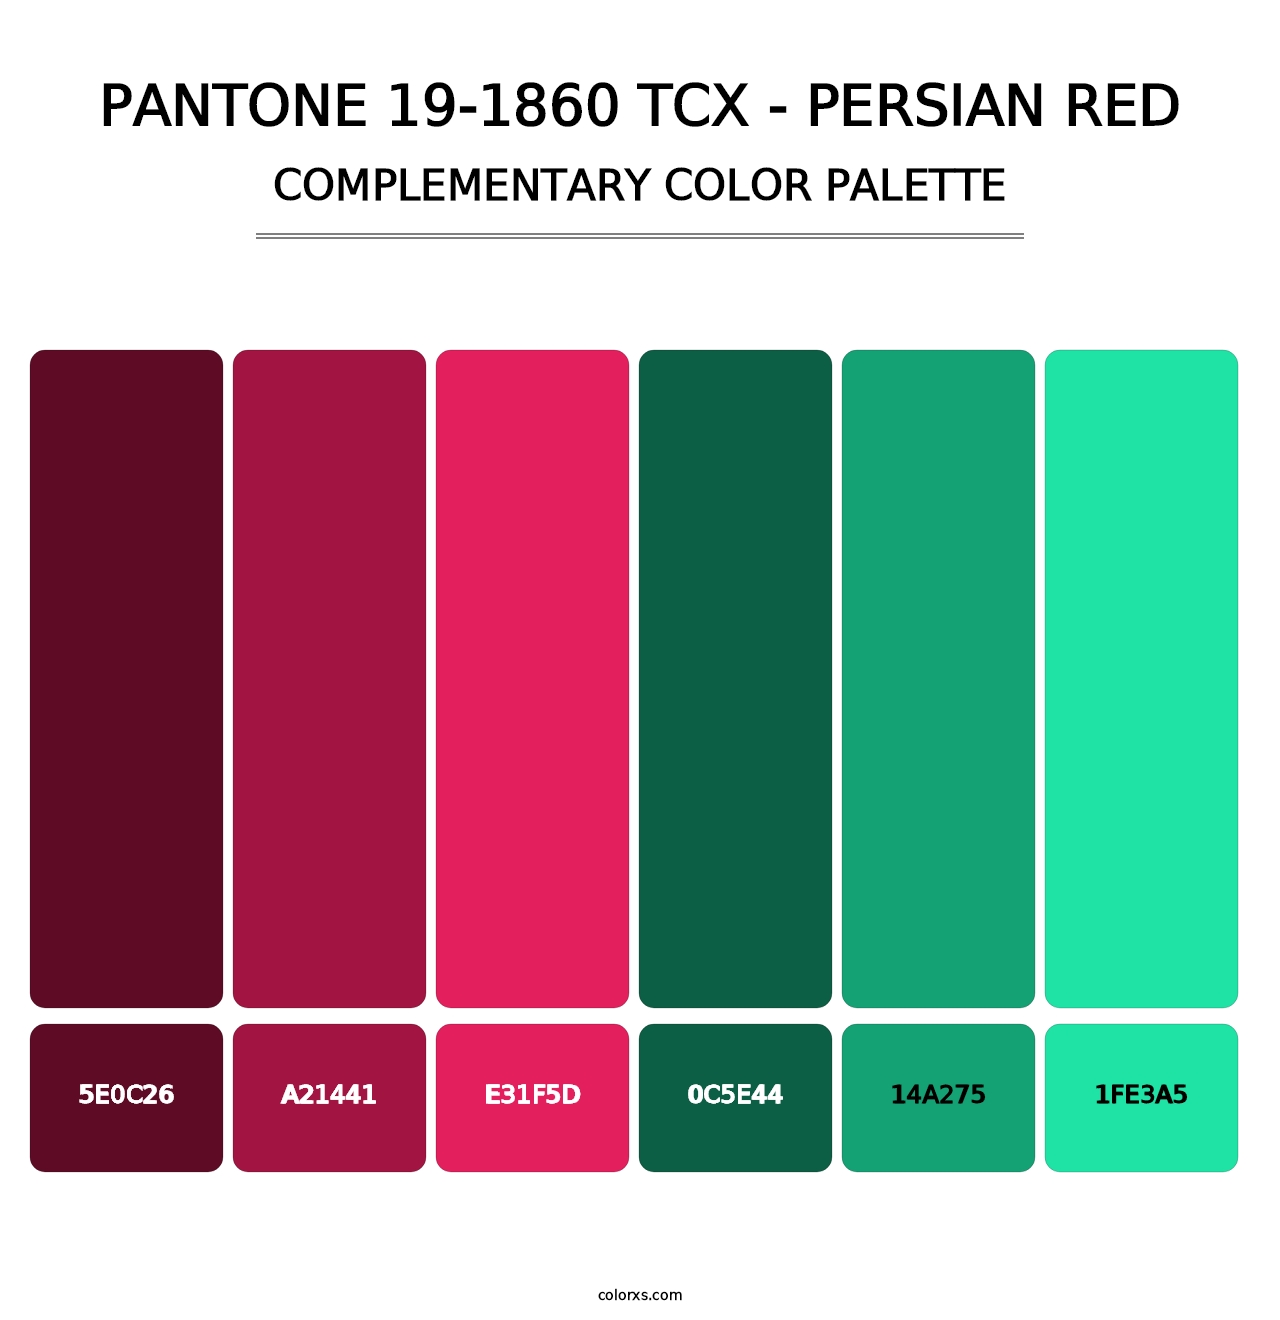 PANTONE 19-1860 TCX - Persian Red - Complementary Color Palette